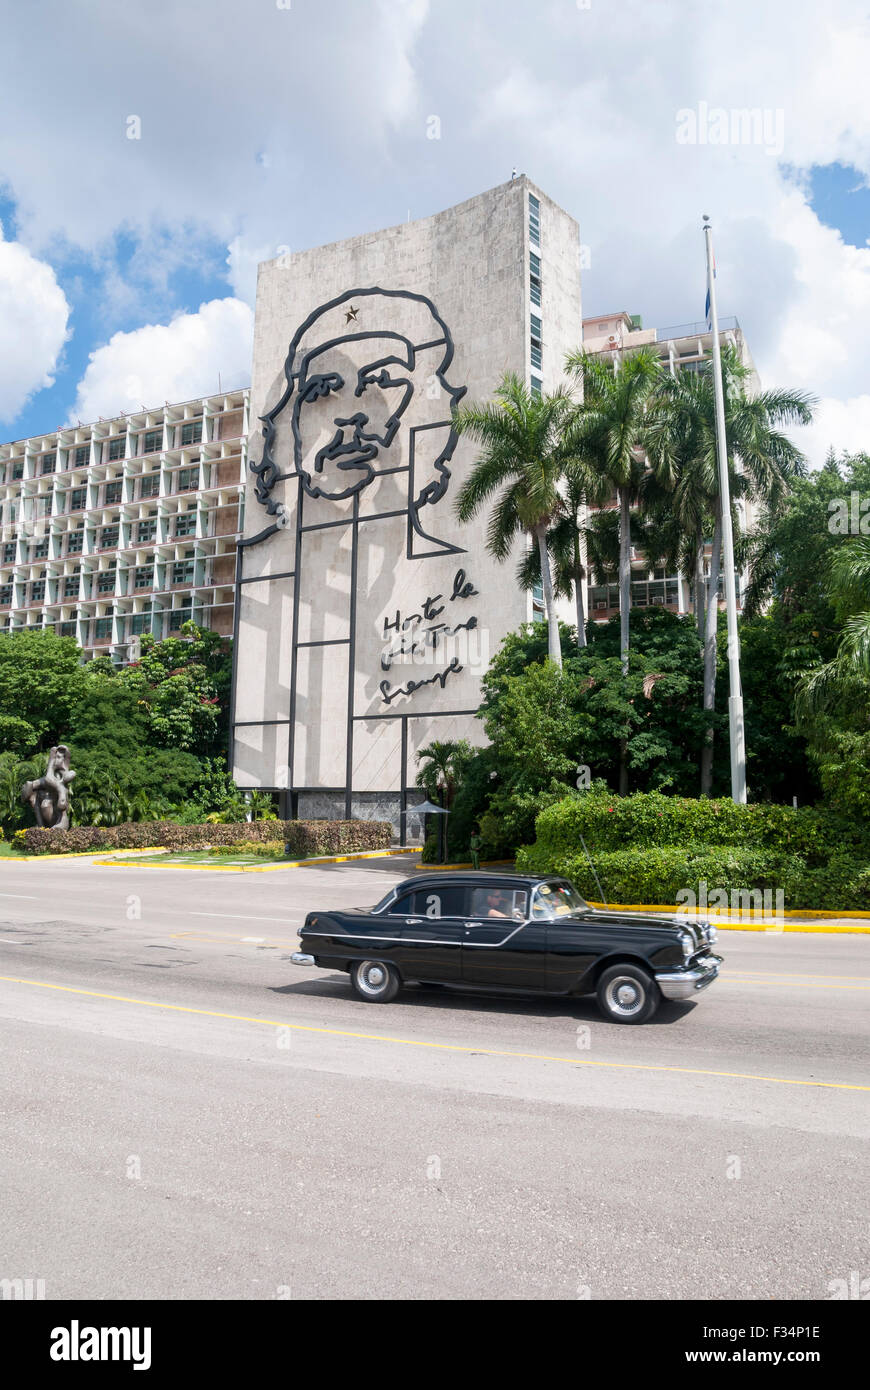 A view from Revolution square of the sculptured image of Che Guevara on the Ministry of the Interior building in Havana Cuba. Stock Photo